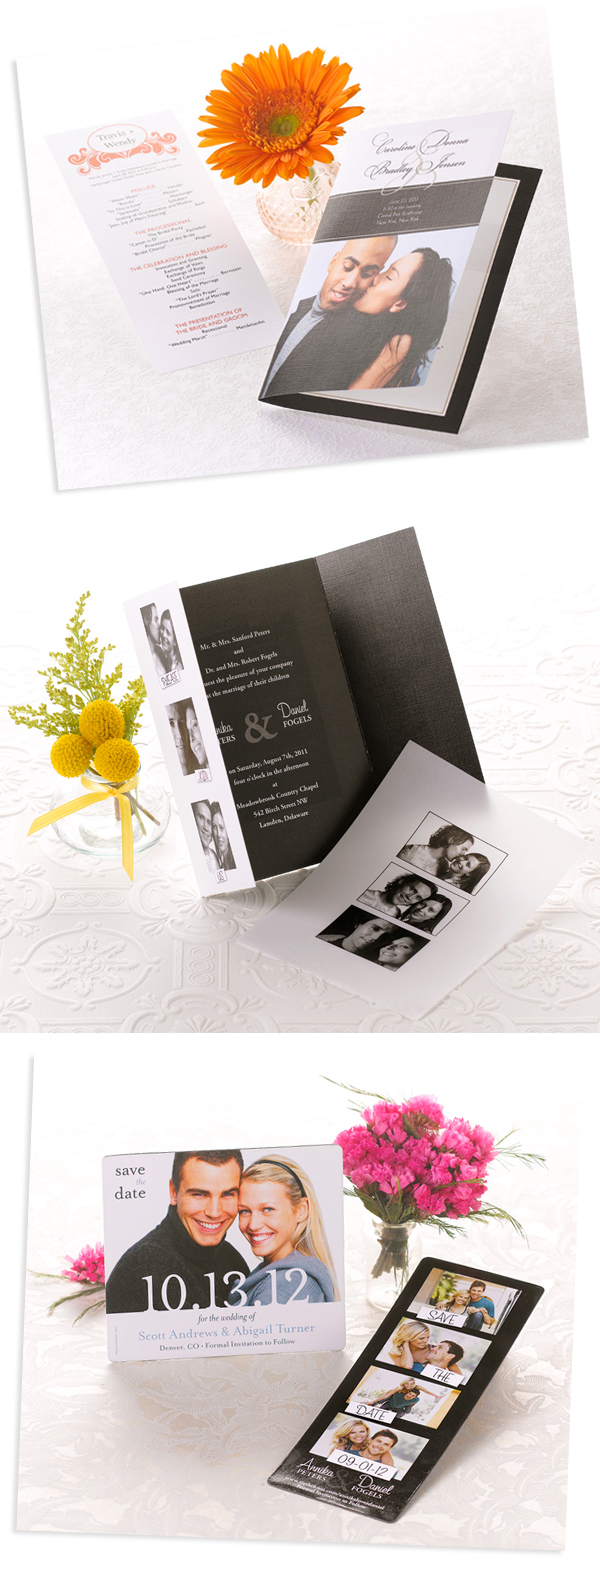 personalized wedding invitations, save the dates and programs